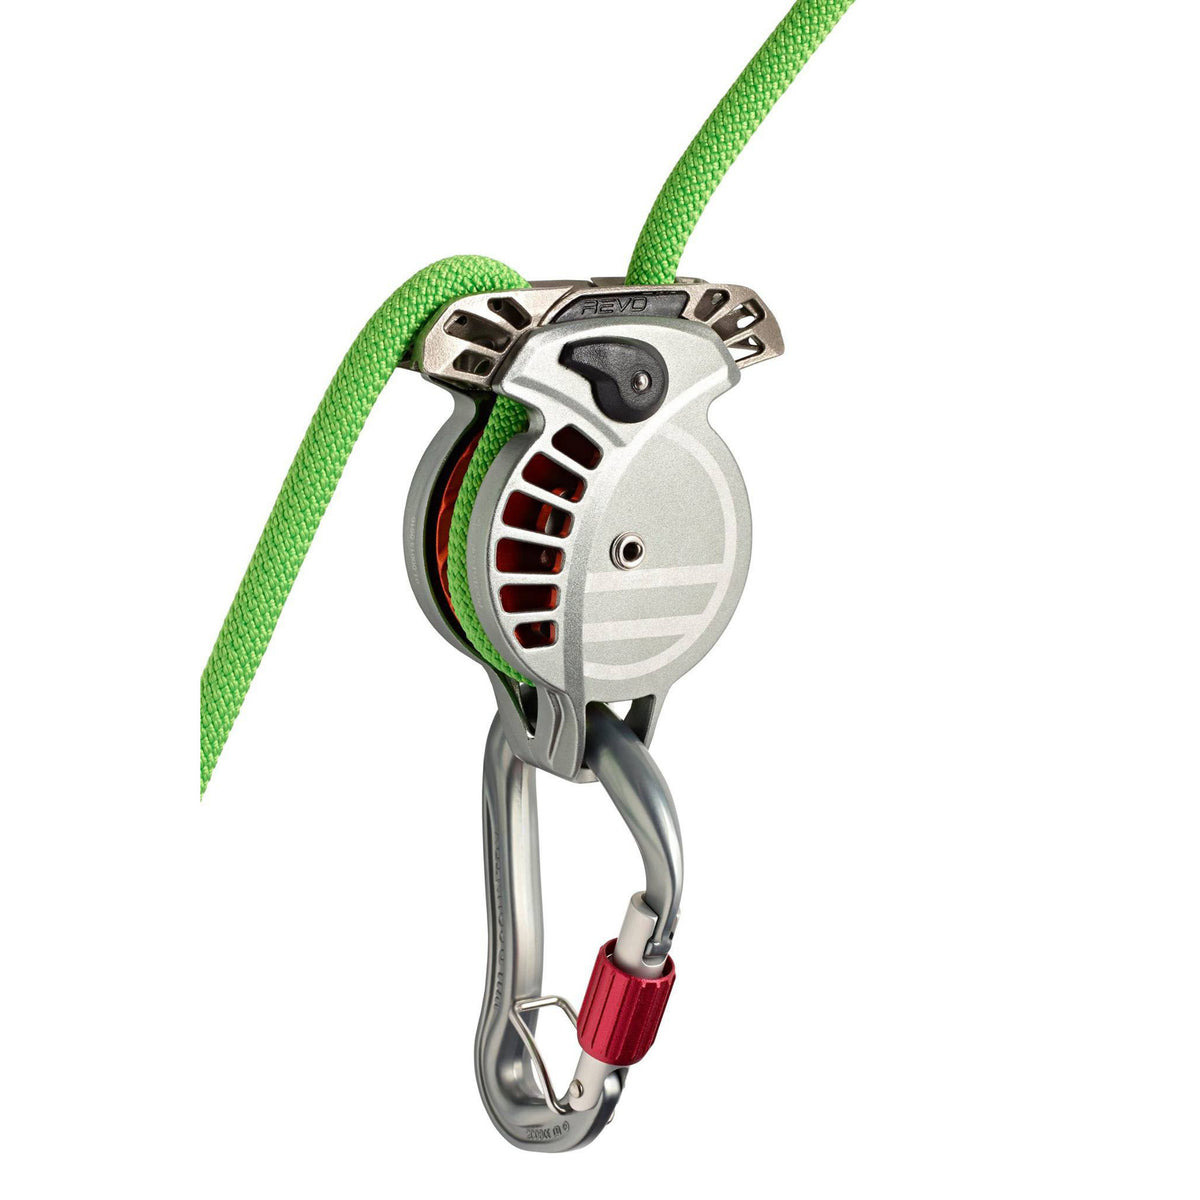 Wild Country REVO belay device, shown in use with a green rope and silver carabiner